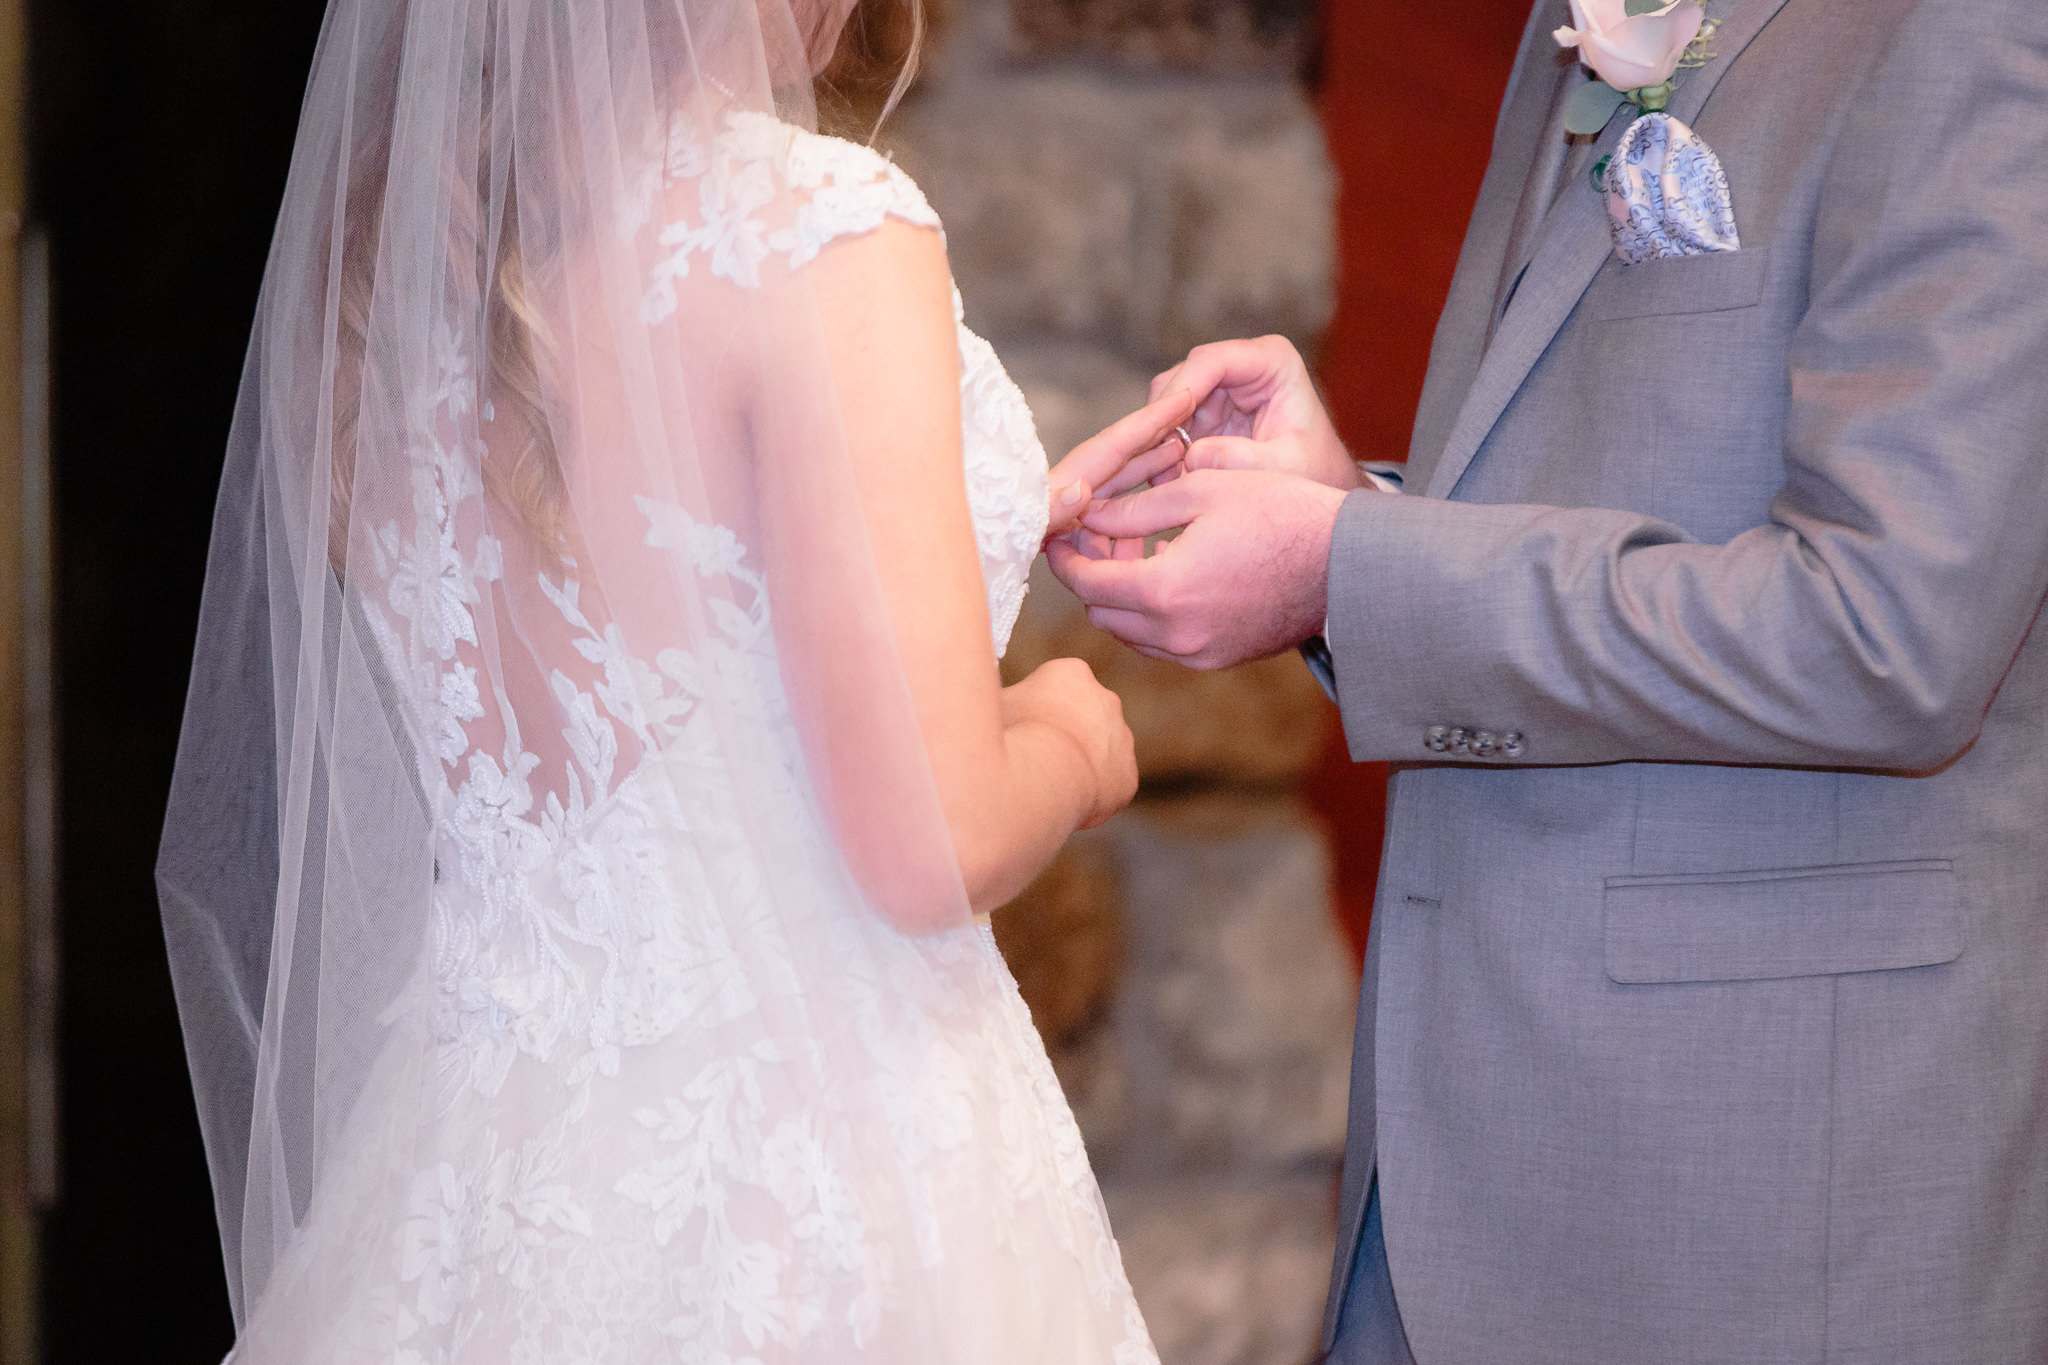 Groom places the wedding band on his bride's finger during their Oglebay wedding